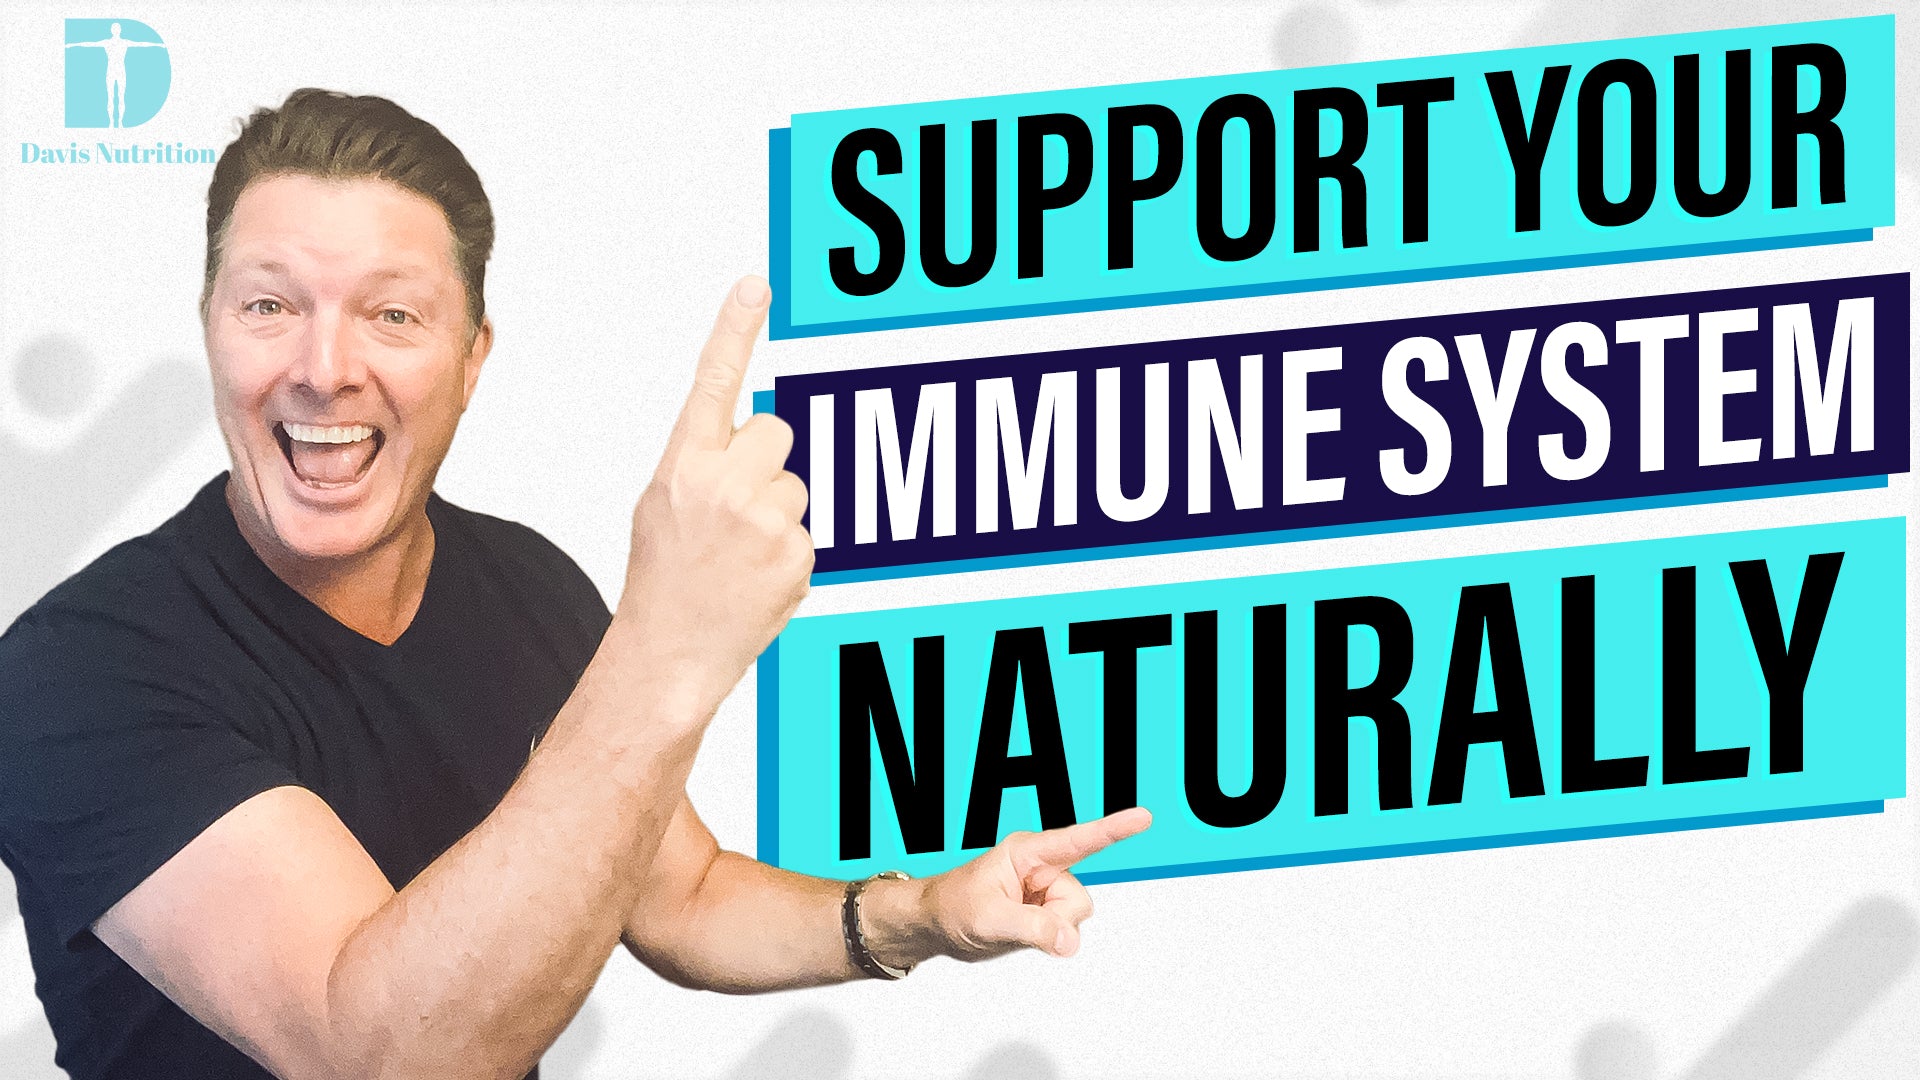 How To Naturally Support Your Immune System